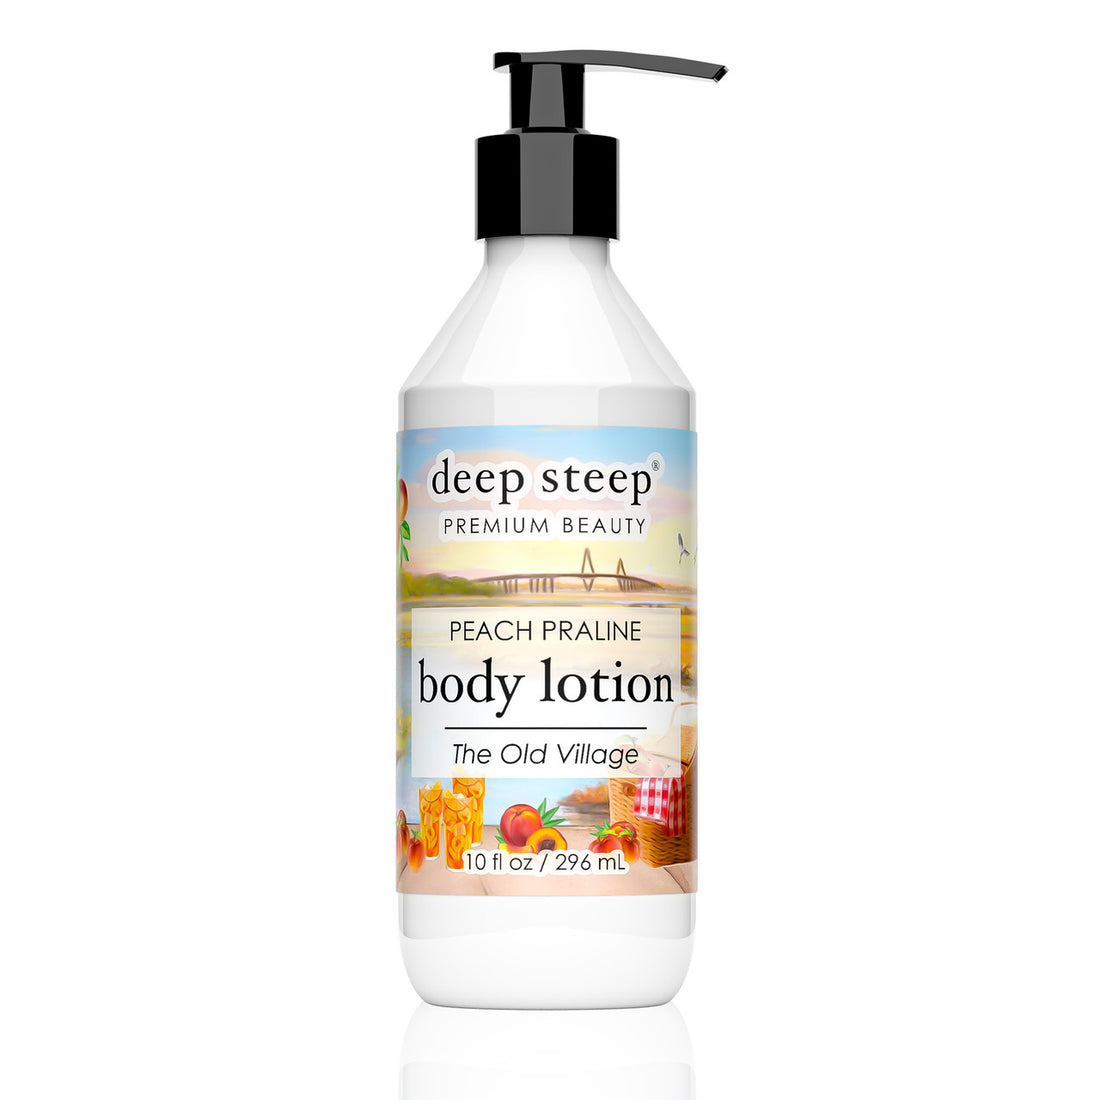 10oz Body Lotion - Peach Praline (The Old Village) - Front